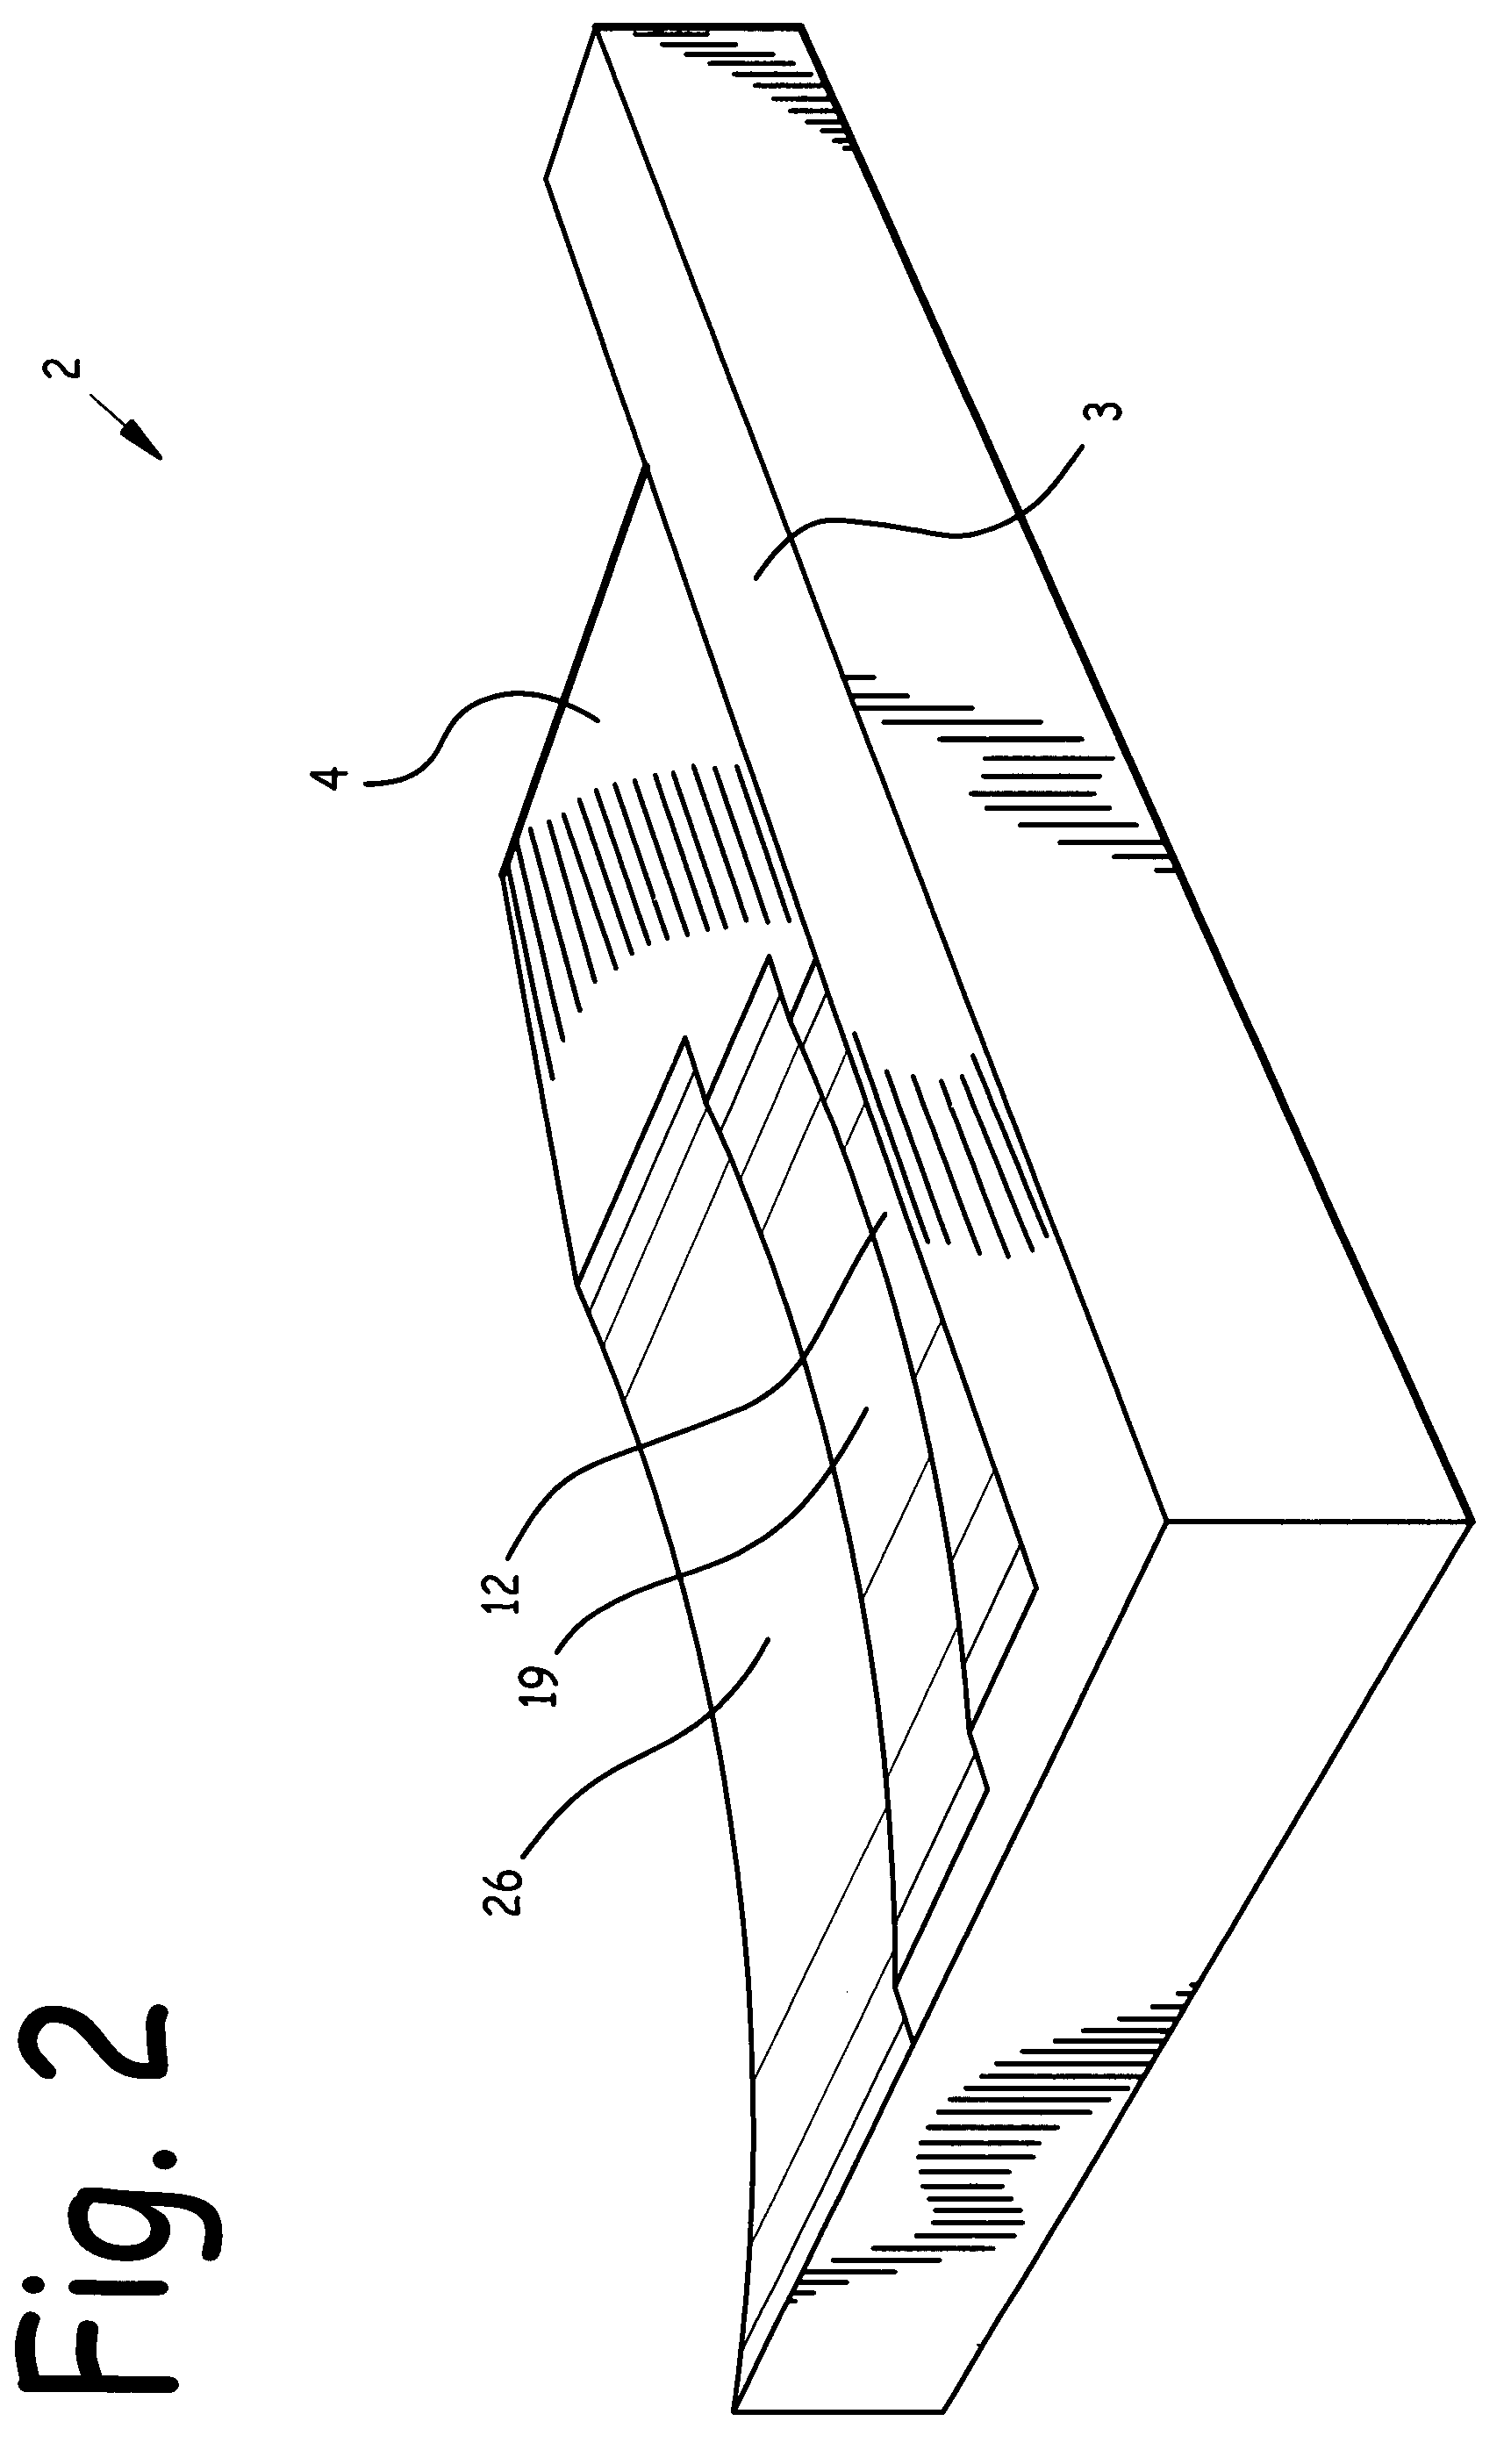 Apparatus and method for changing barbell weights